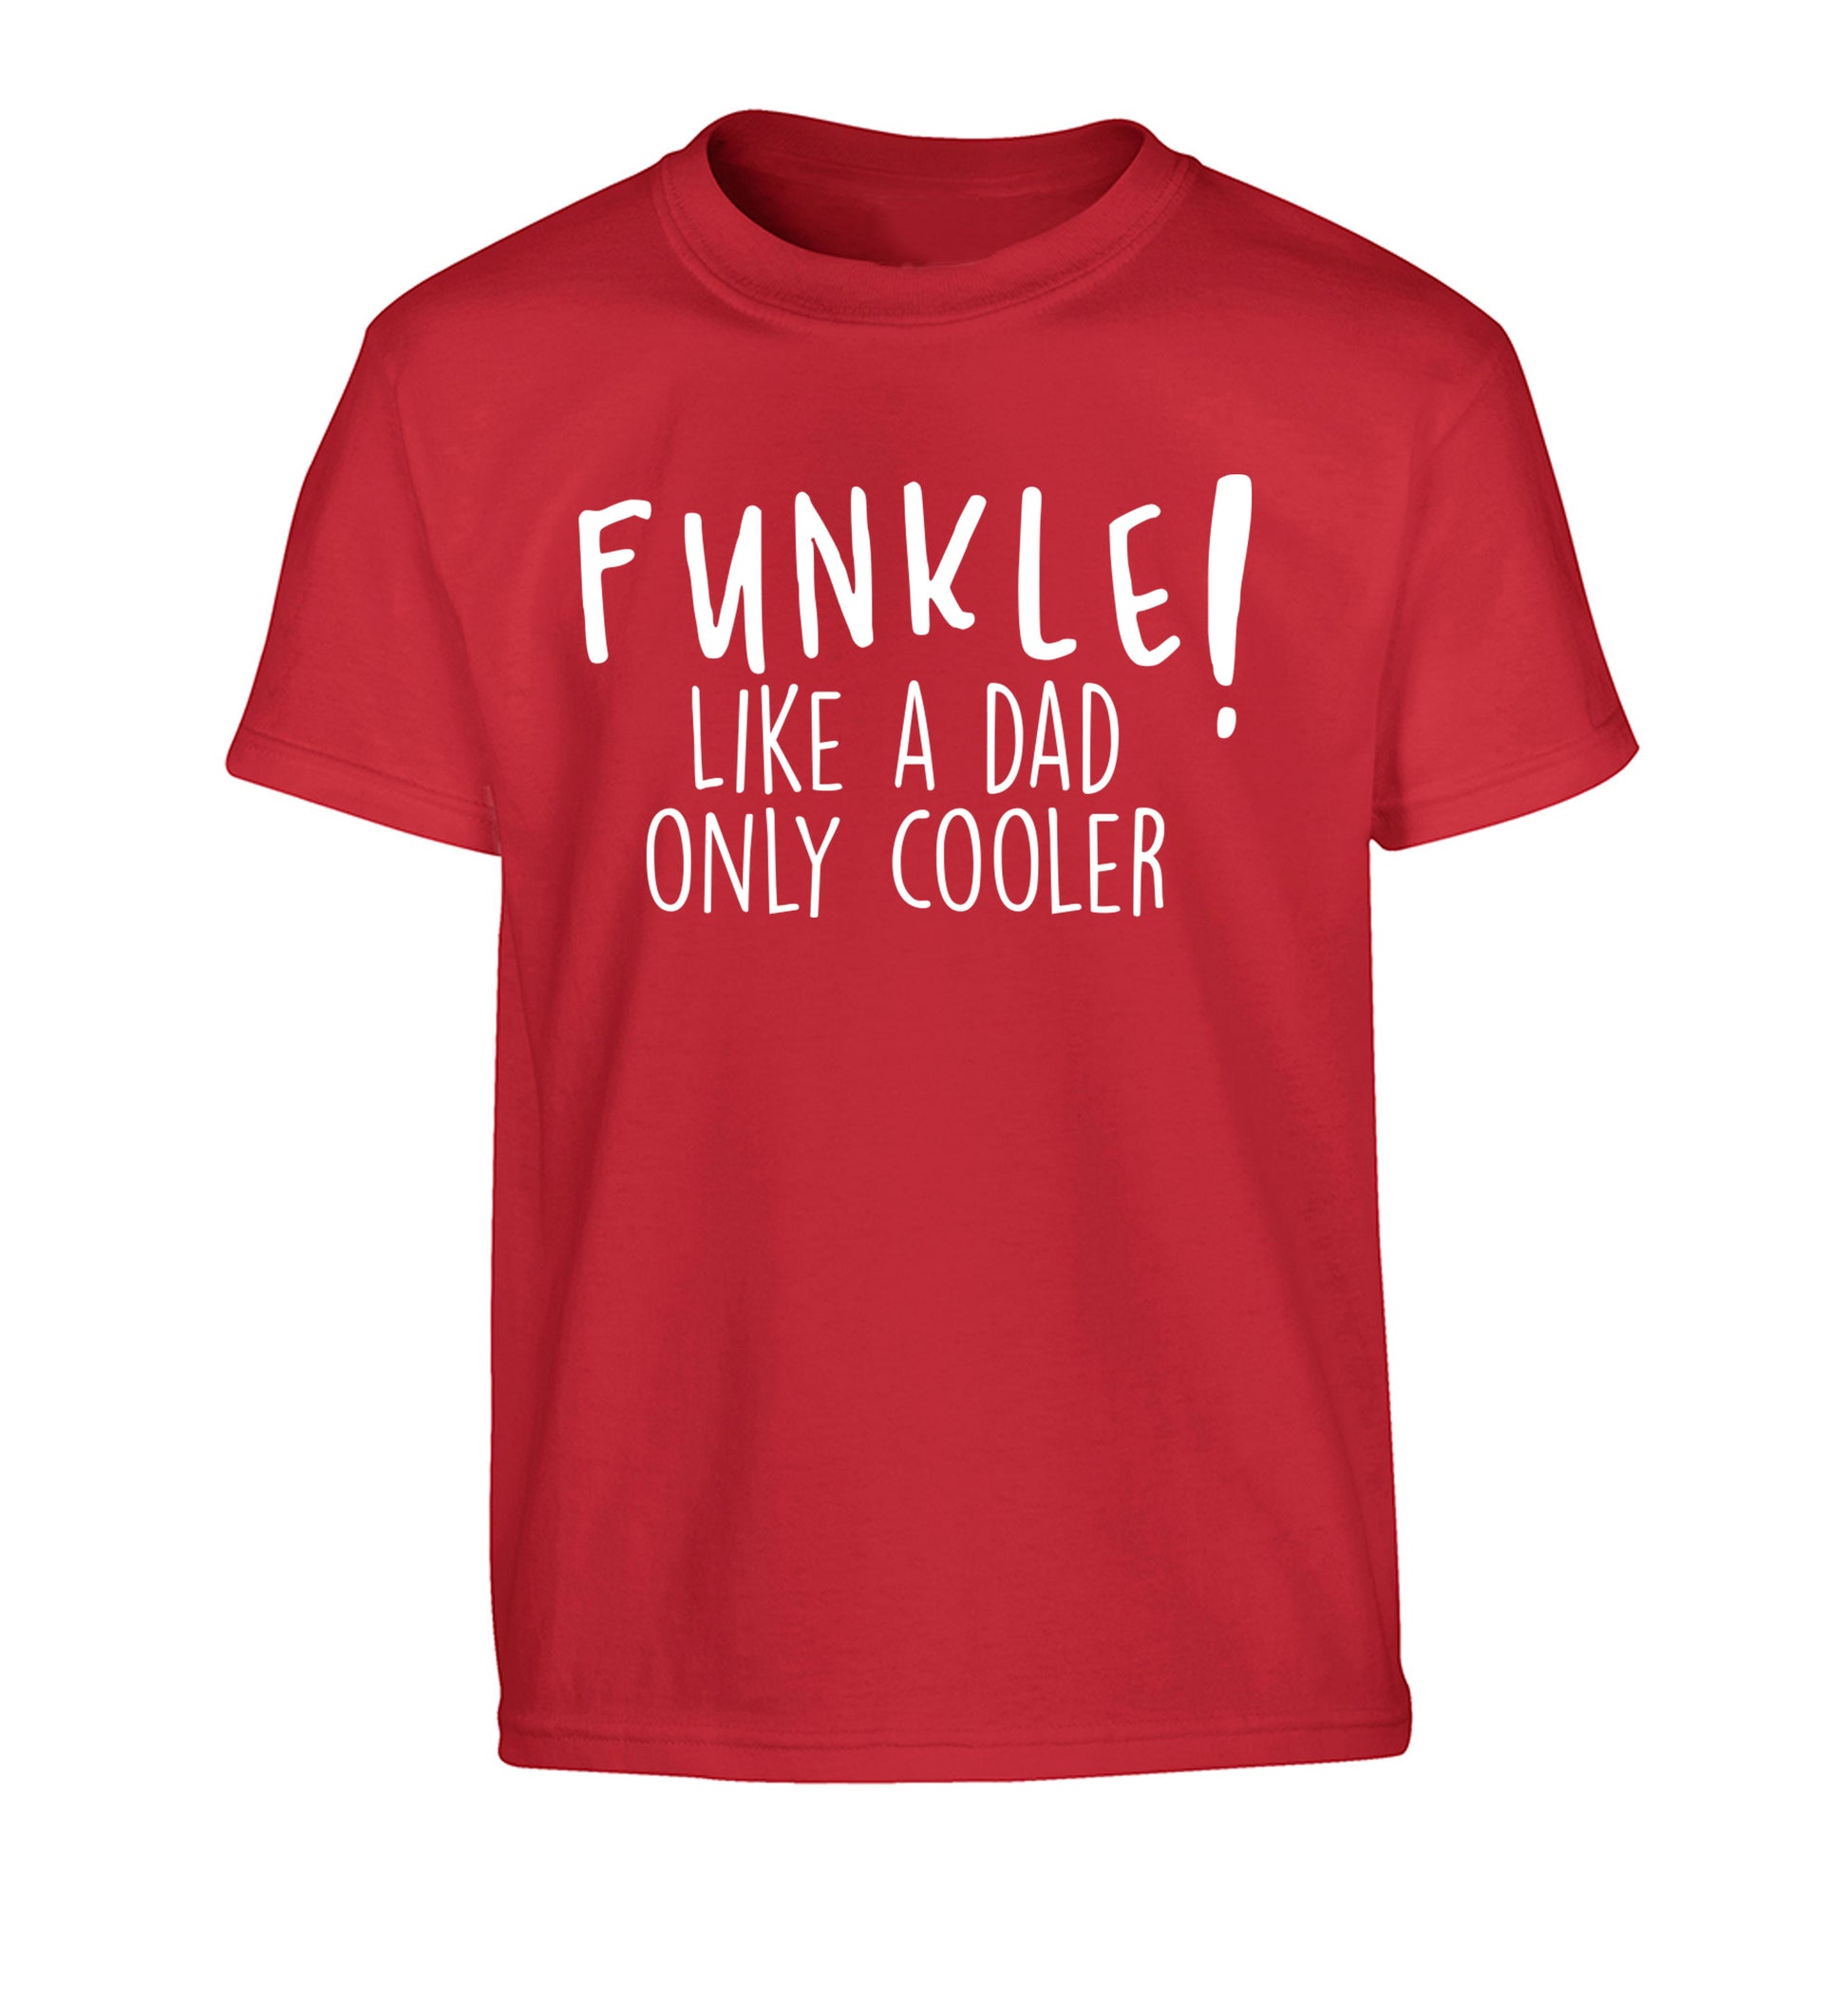 Funkle Like a Dad Only Cooler Children's red Tshirt 12-13 Years